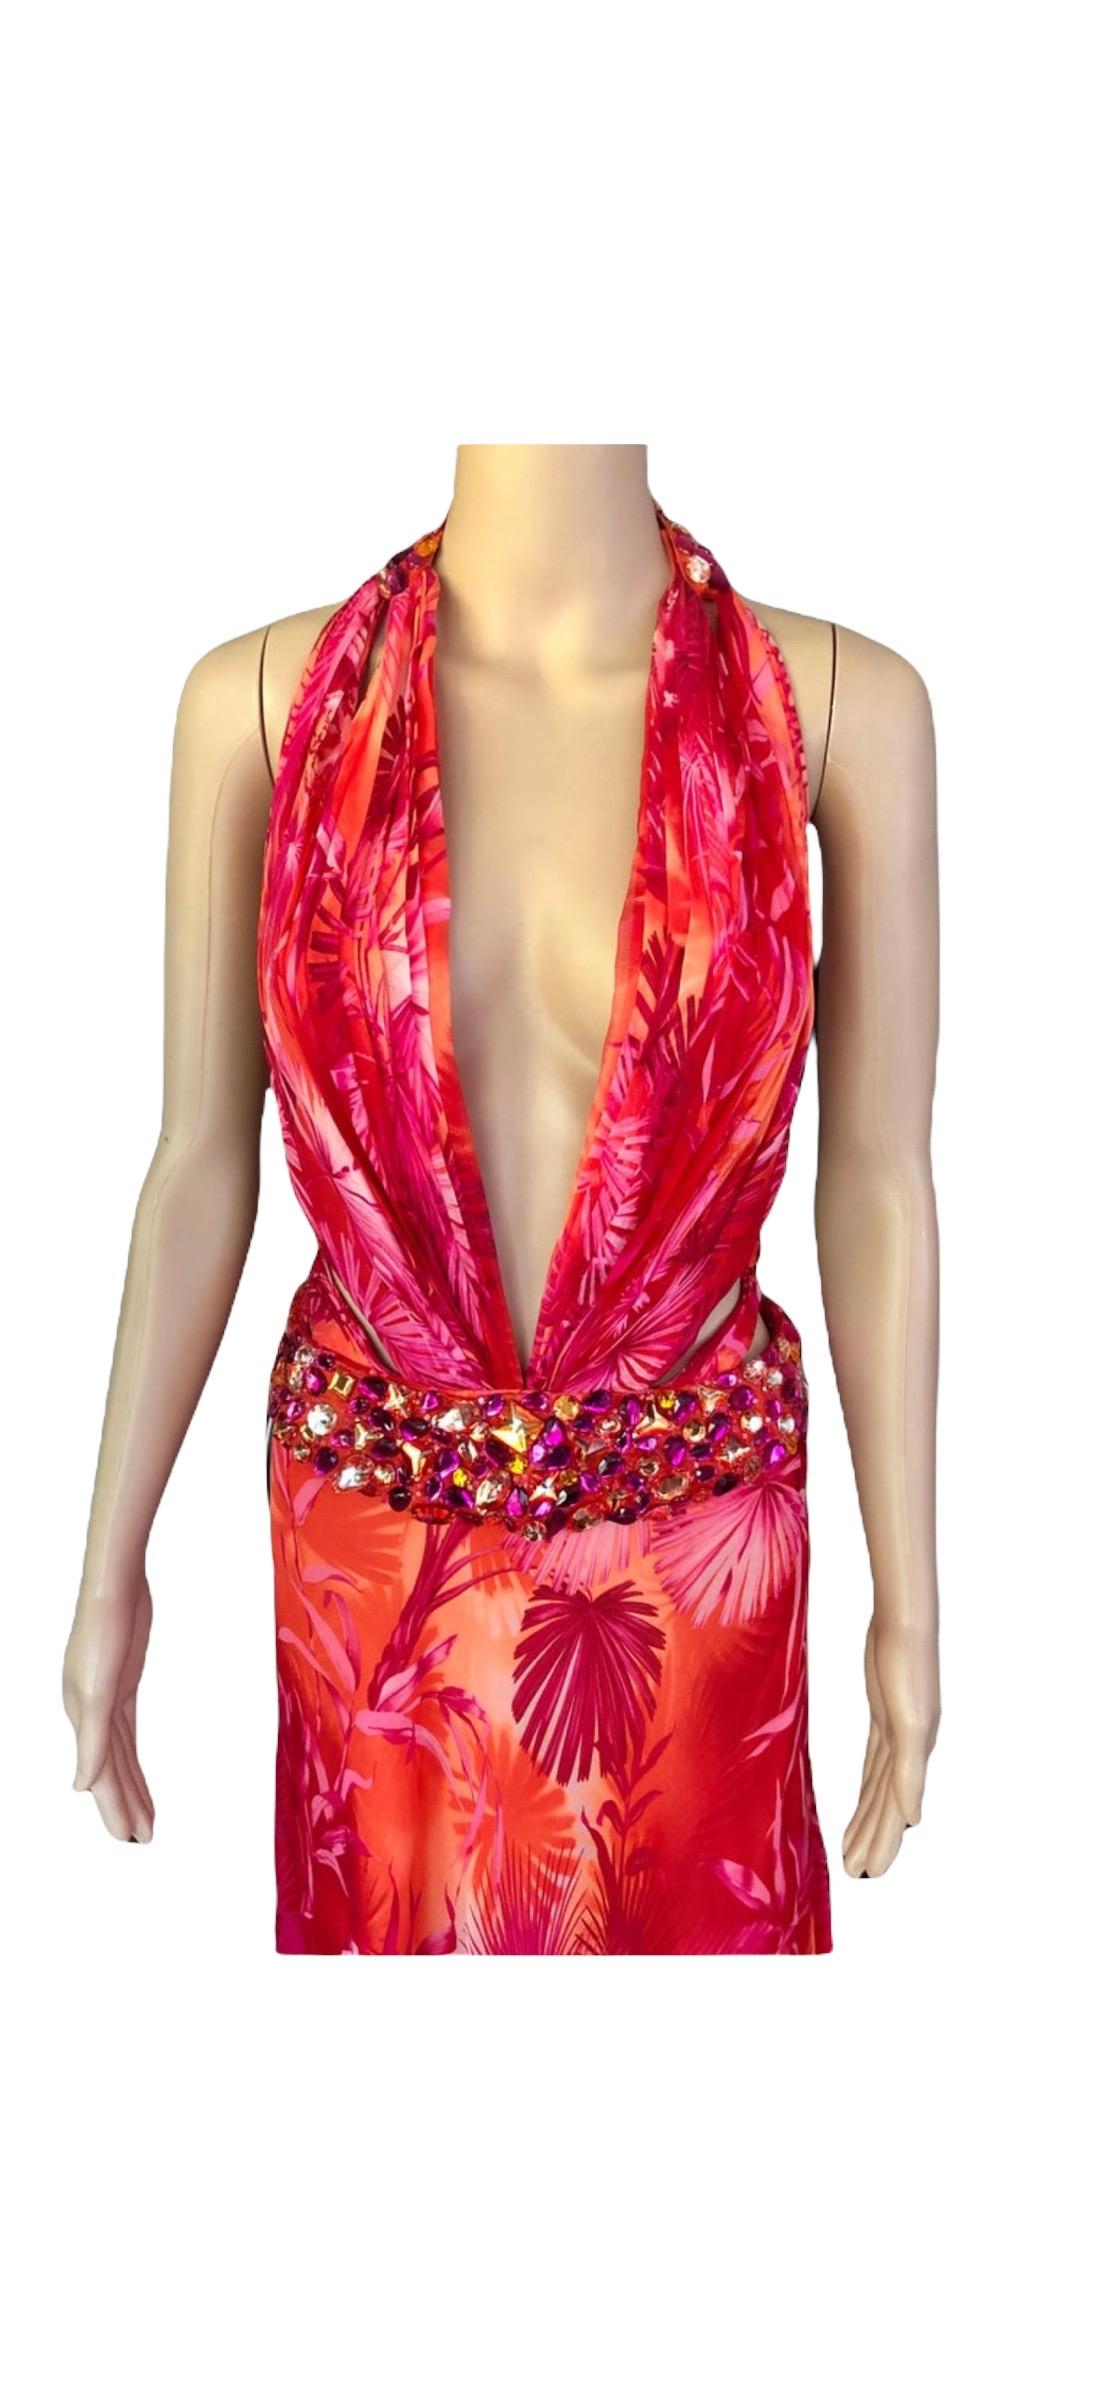 Gianni Versace S/S 2000 Runway Embellished Jungle Print Evening Dress Gown 5